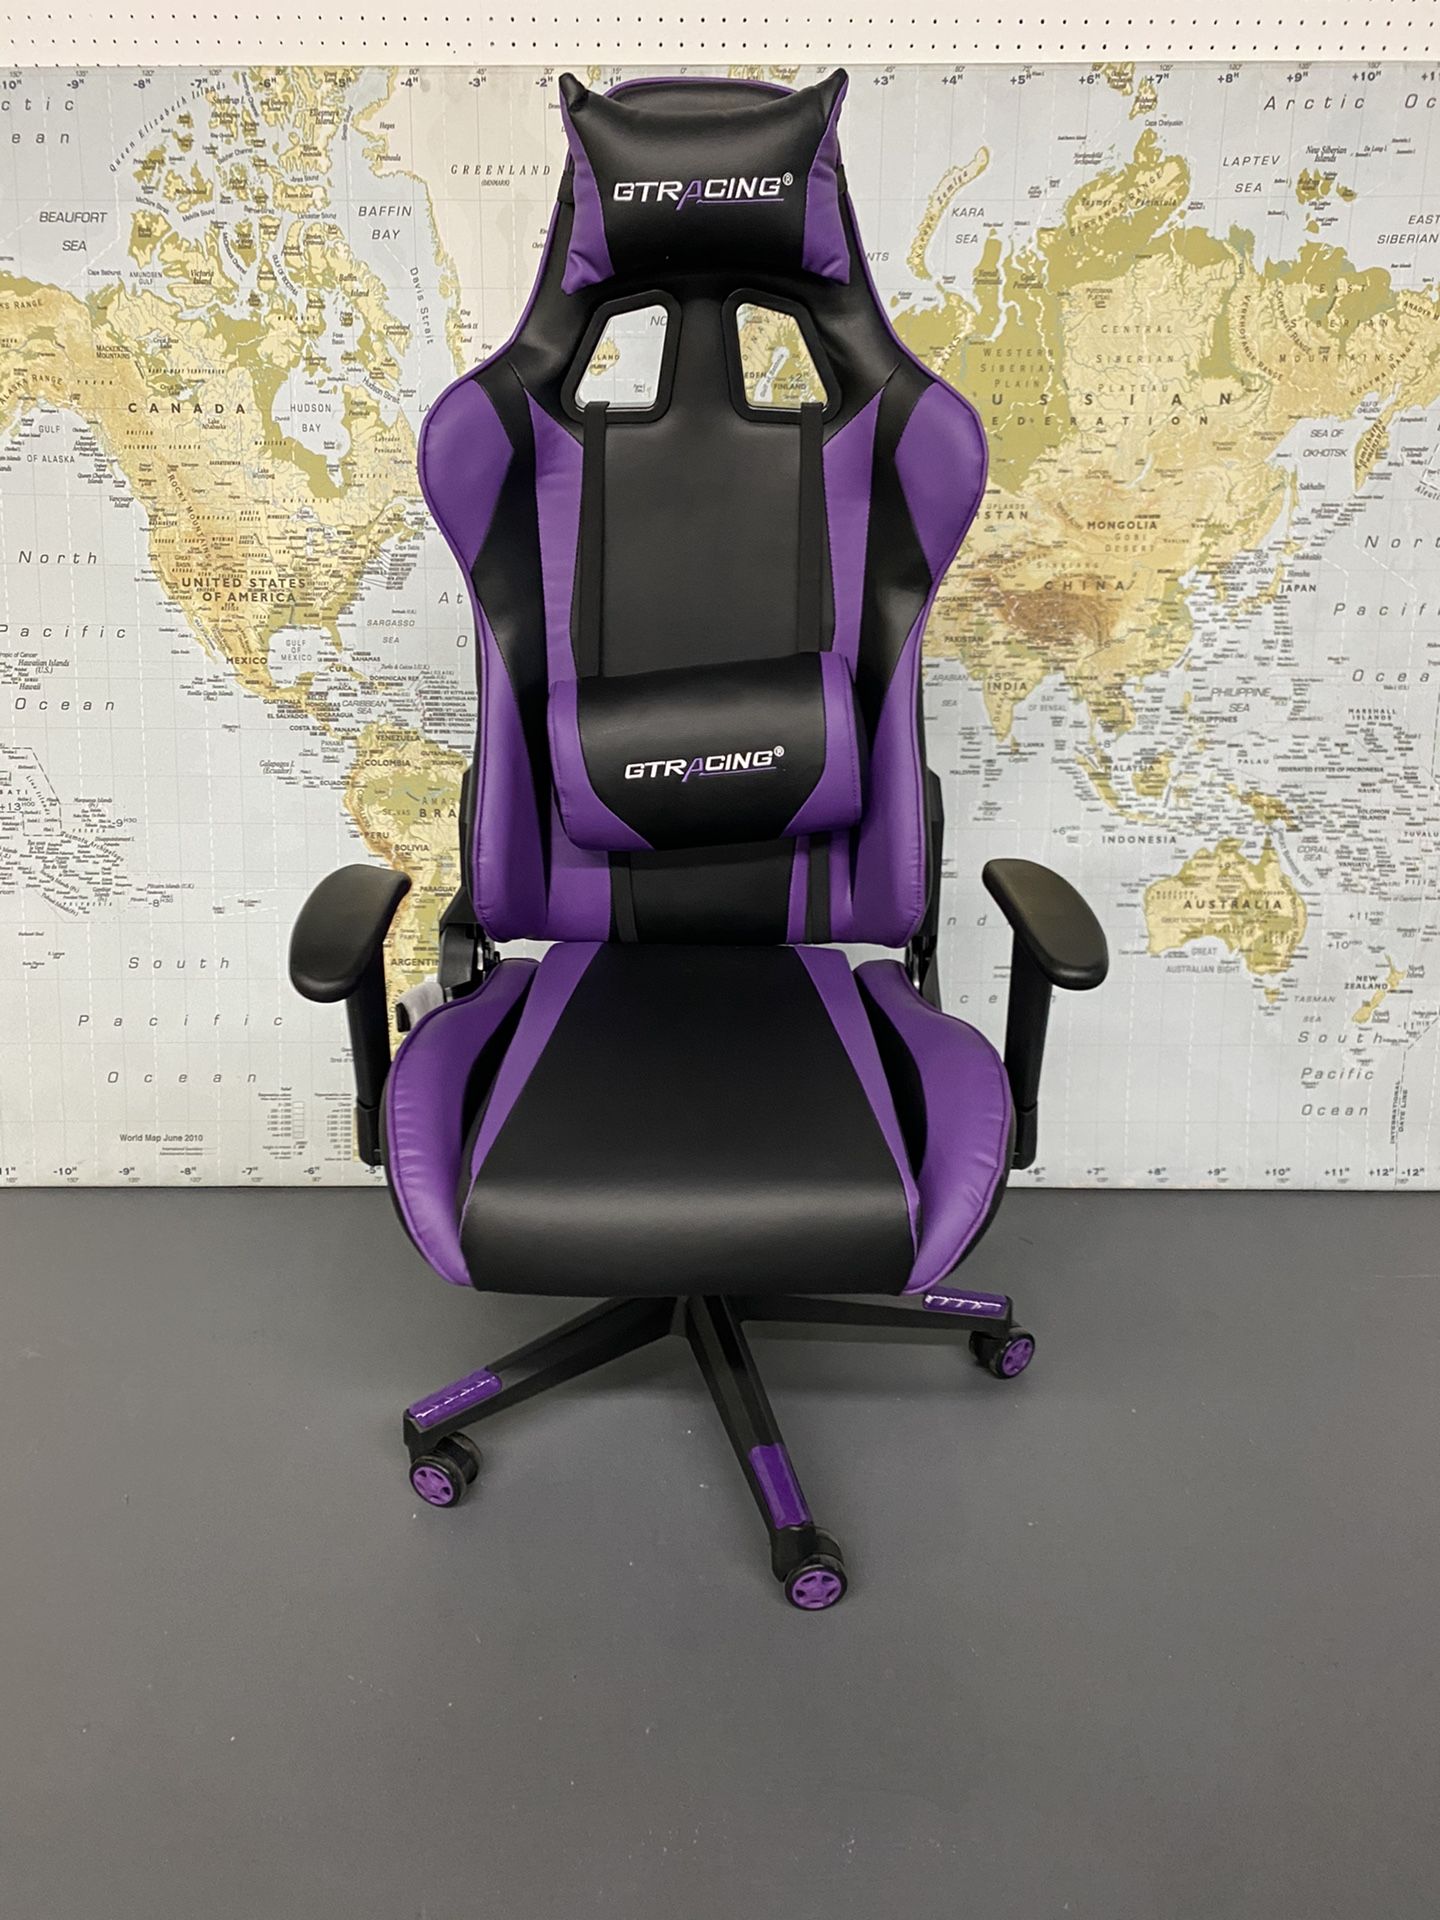 GTRacing game Chair, Computer Chair, or Office Chair. Limited Violet Hue.